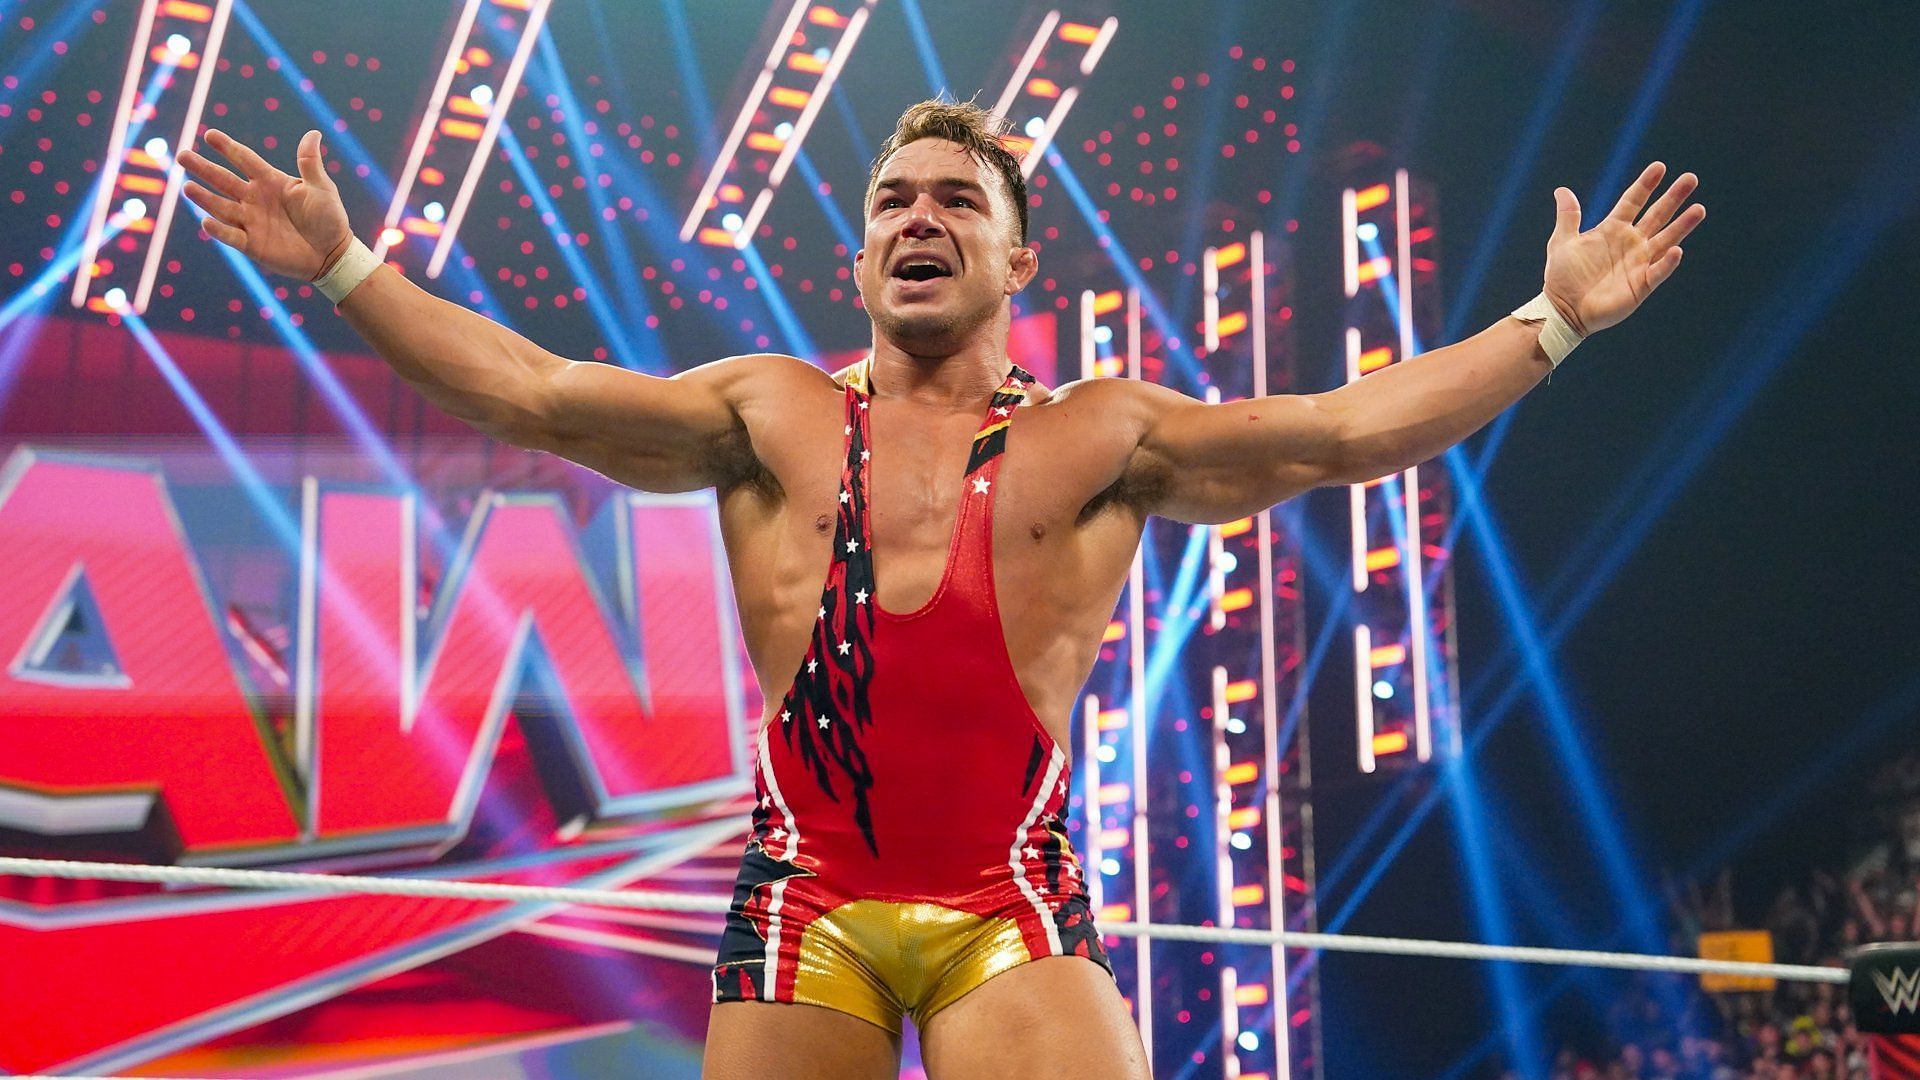 Chad Gable stands tall on WWE RAW